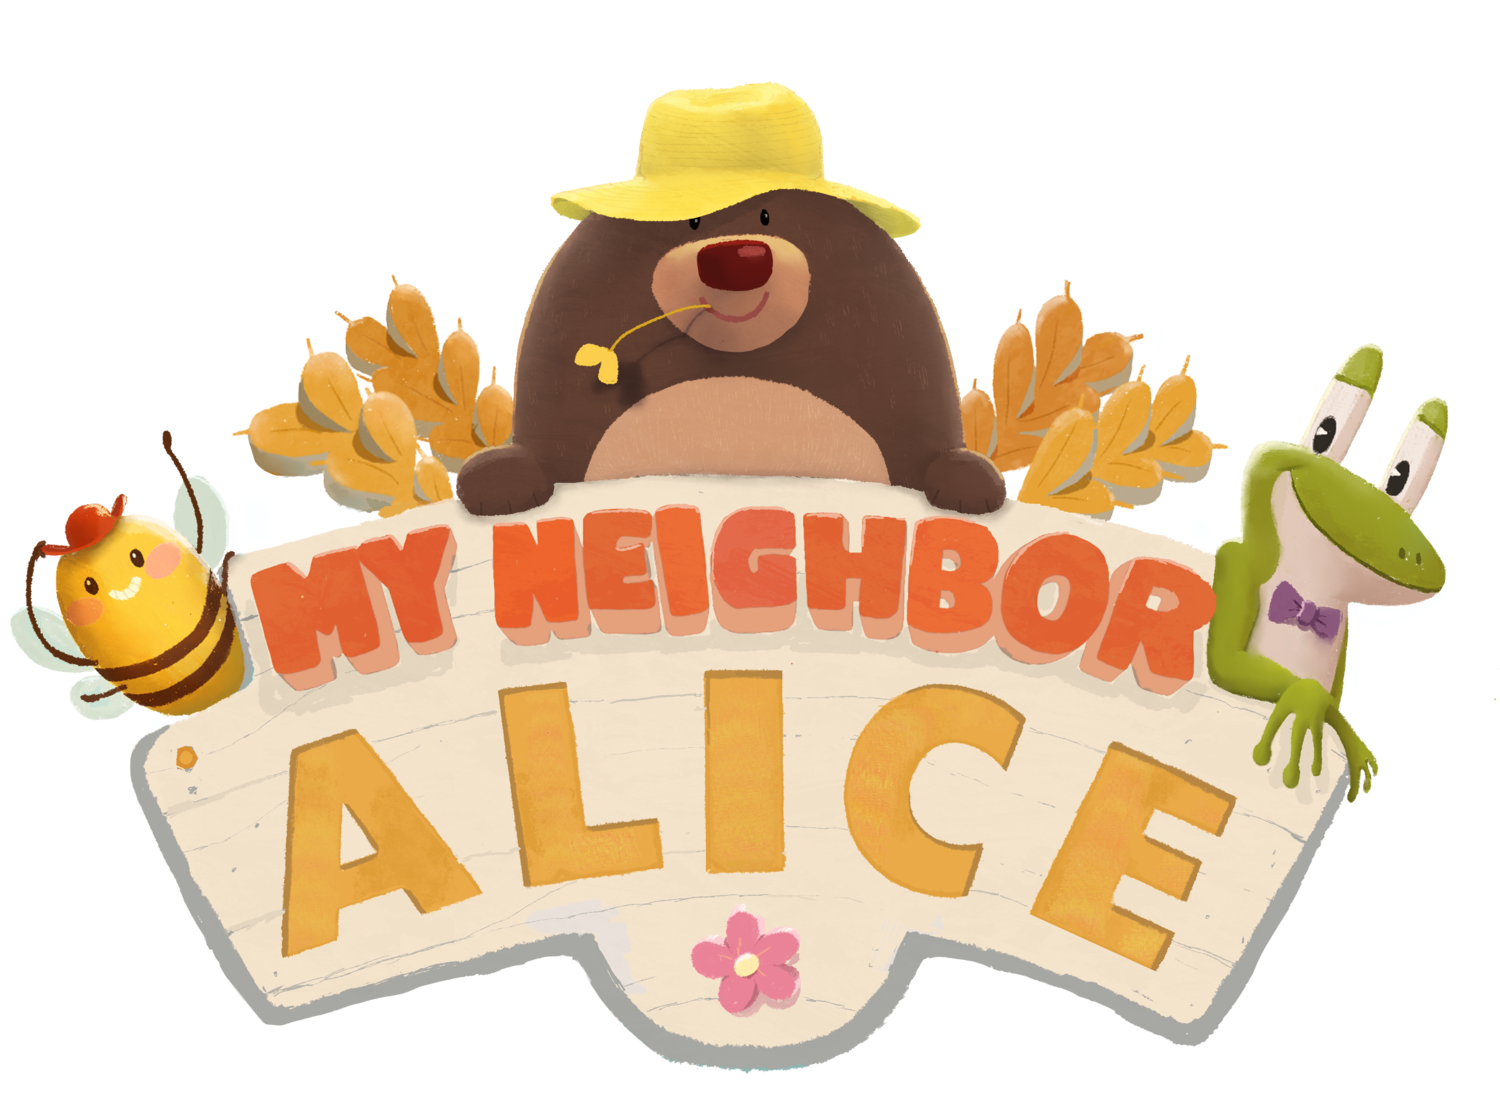 10 of the best Metaverse games: My Neighbour Alice